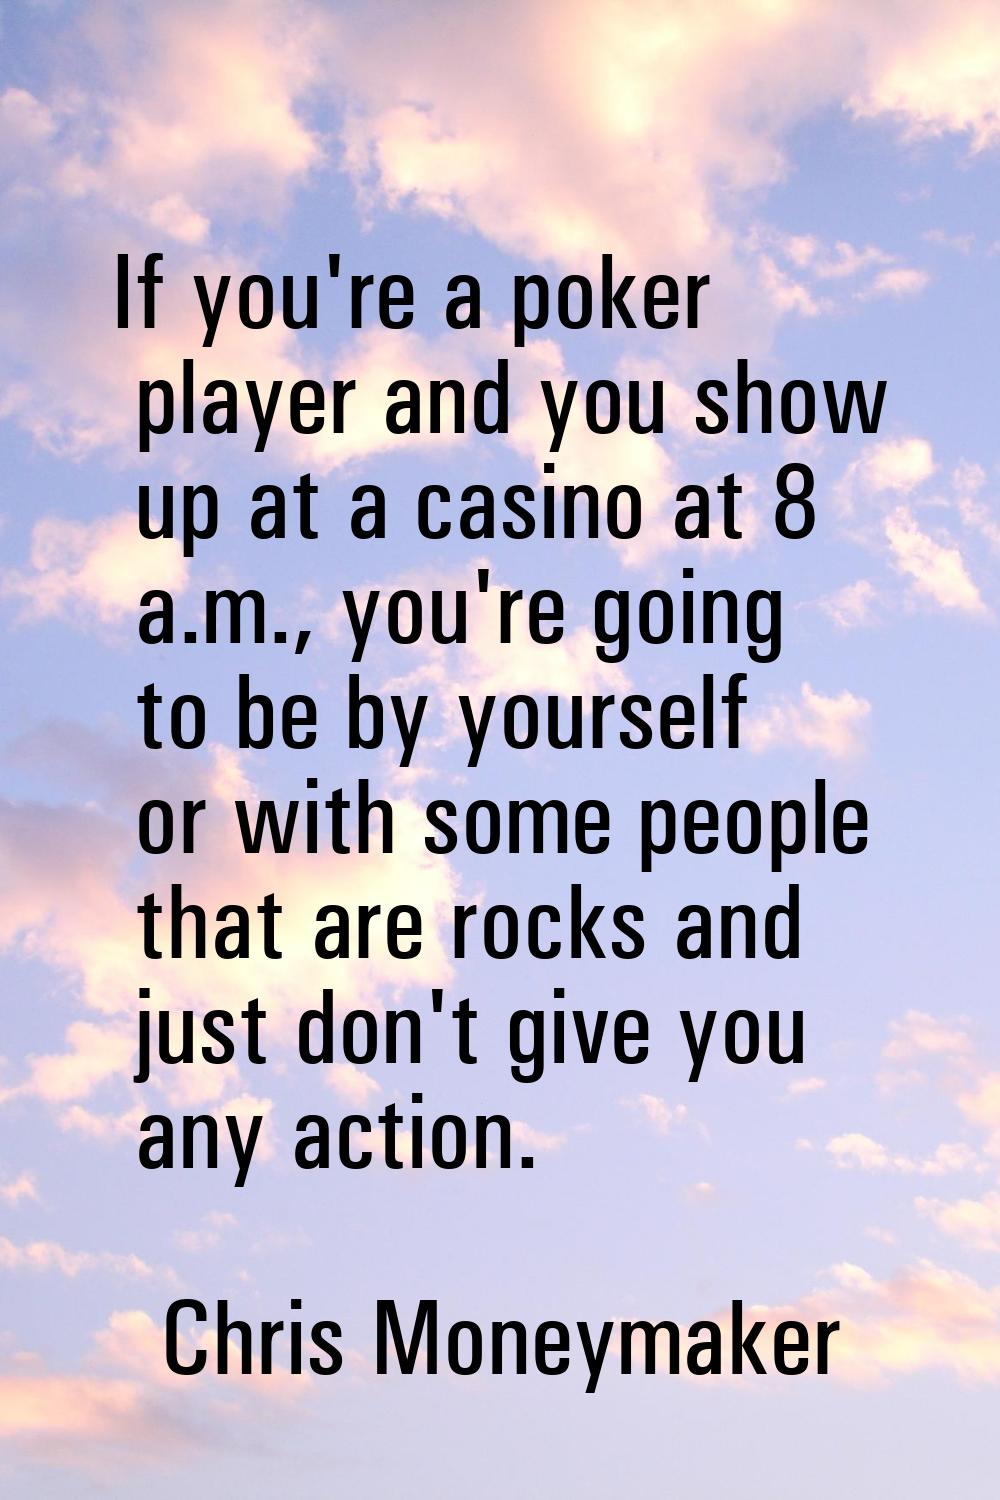 If you're a poker player and you show up at a casino at 8 a.m., you're going to be by yourself or w